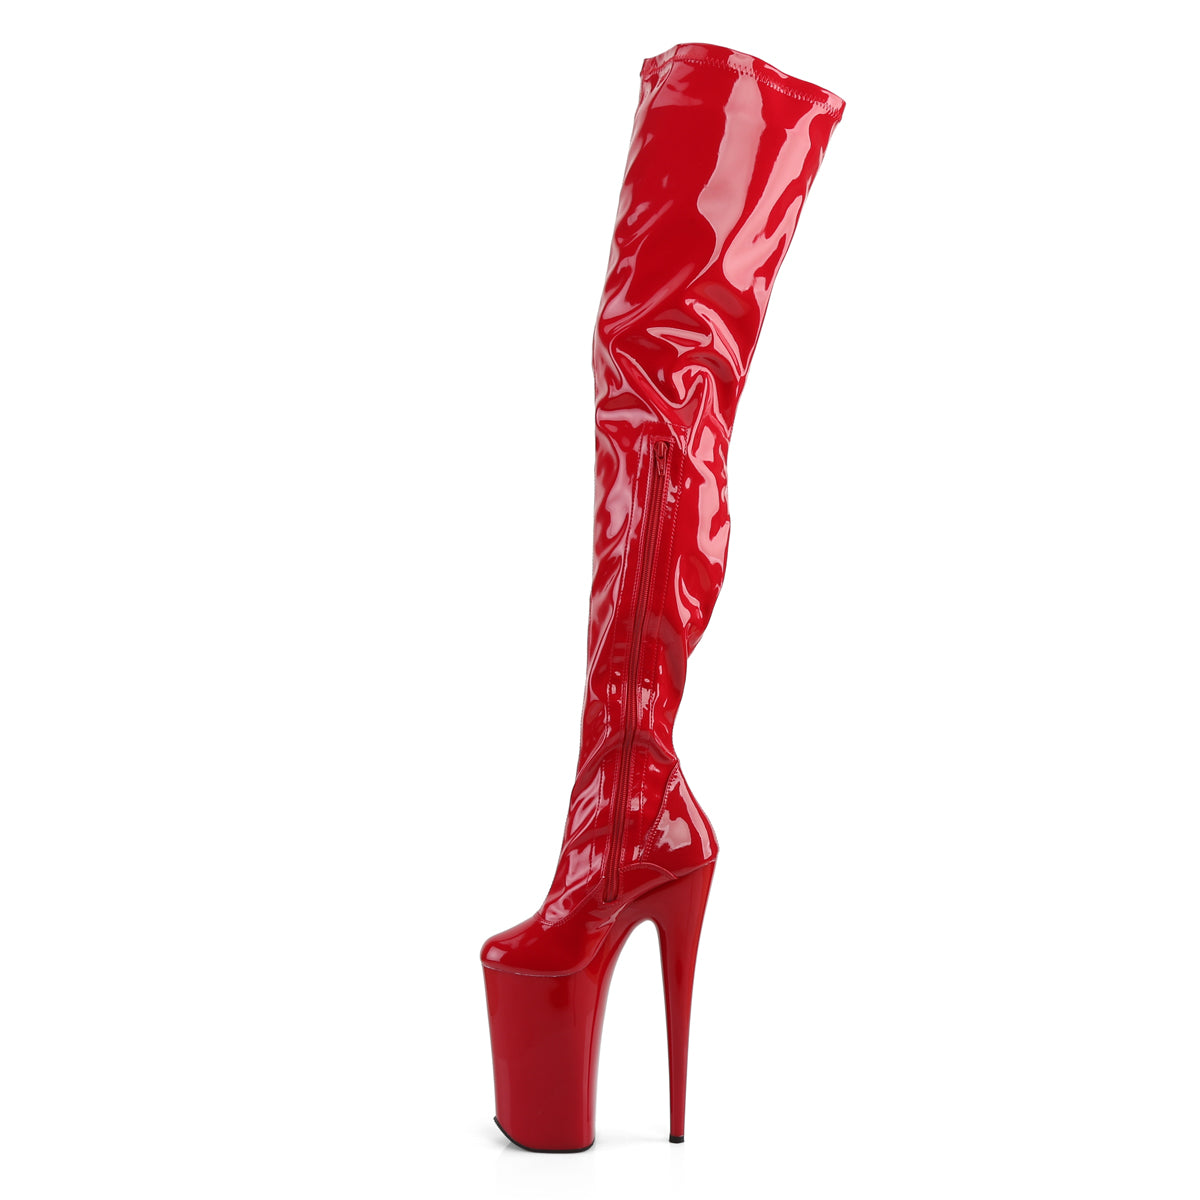 BEYOND-4000 Pleaser Red Stretch Patent/Red Platform Shoes [Extreme High Heels]